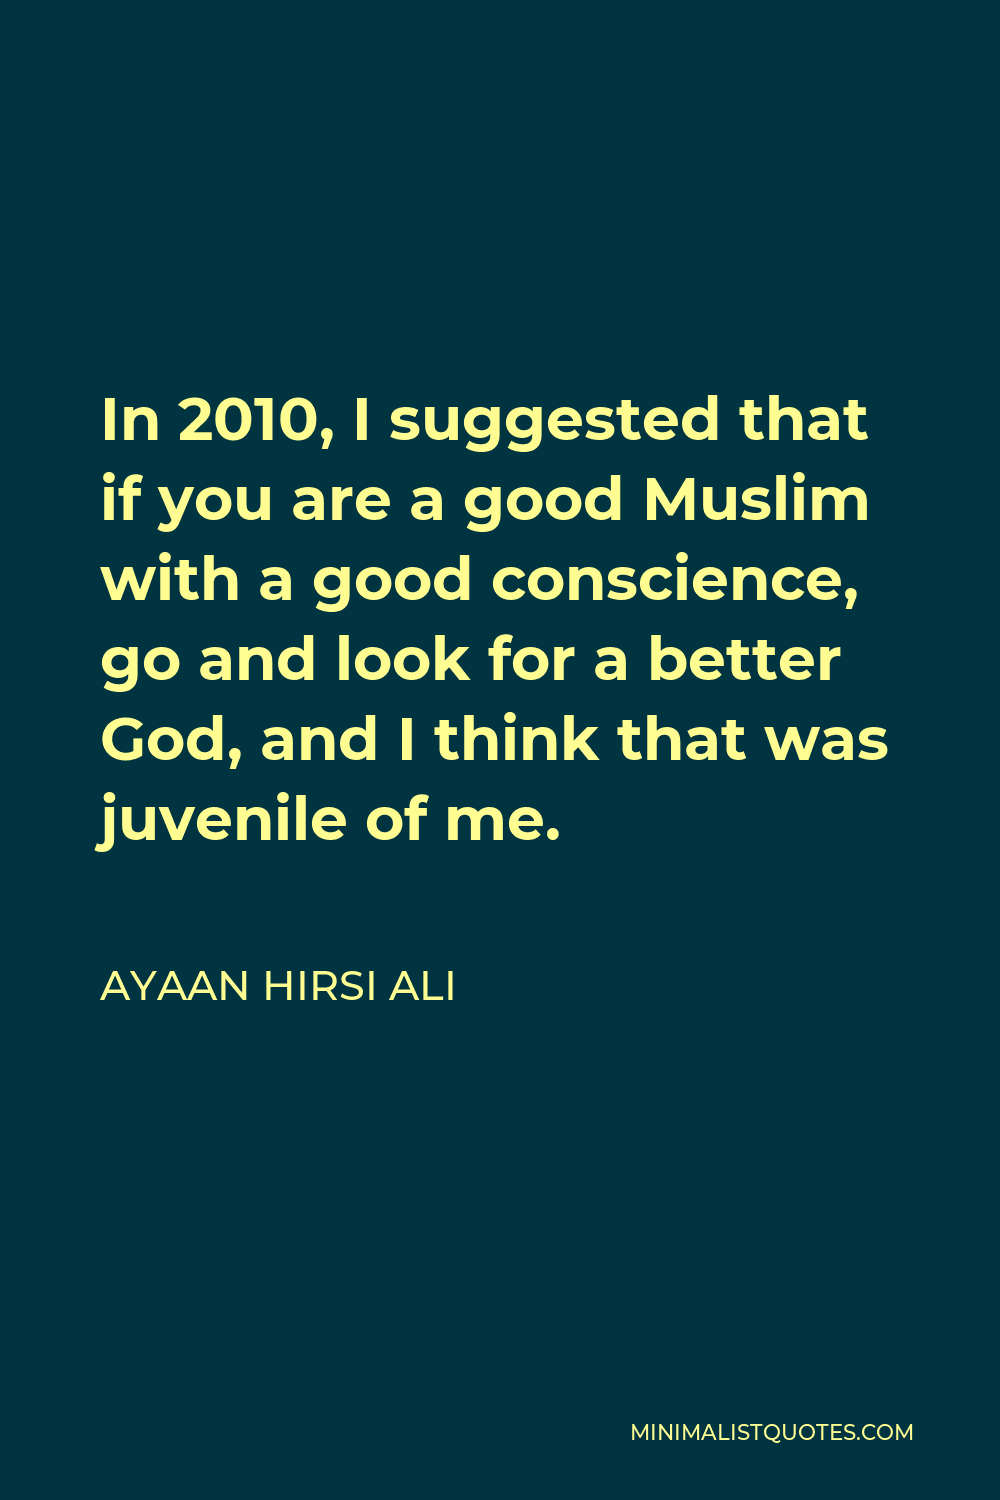 Ayaan Hirsi Ali Quote - In 2010, I suggested that if you are a good Muslim with a good conscience, go and look for a better God, and I think that was juvenile of me.